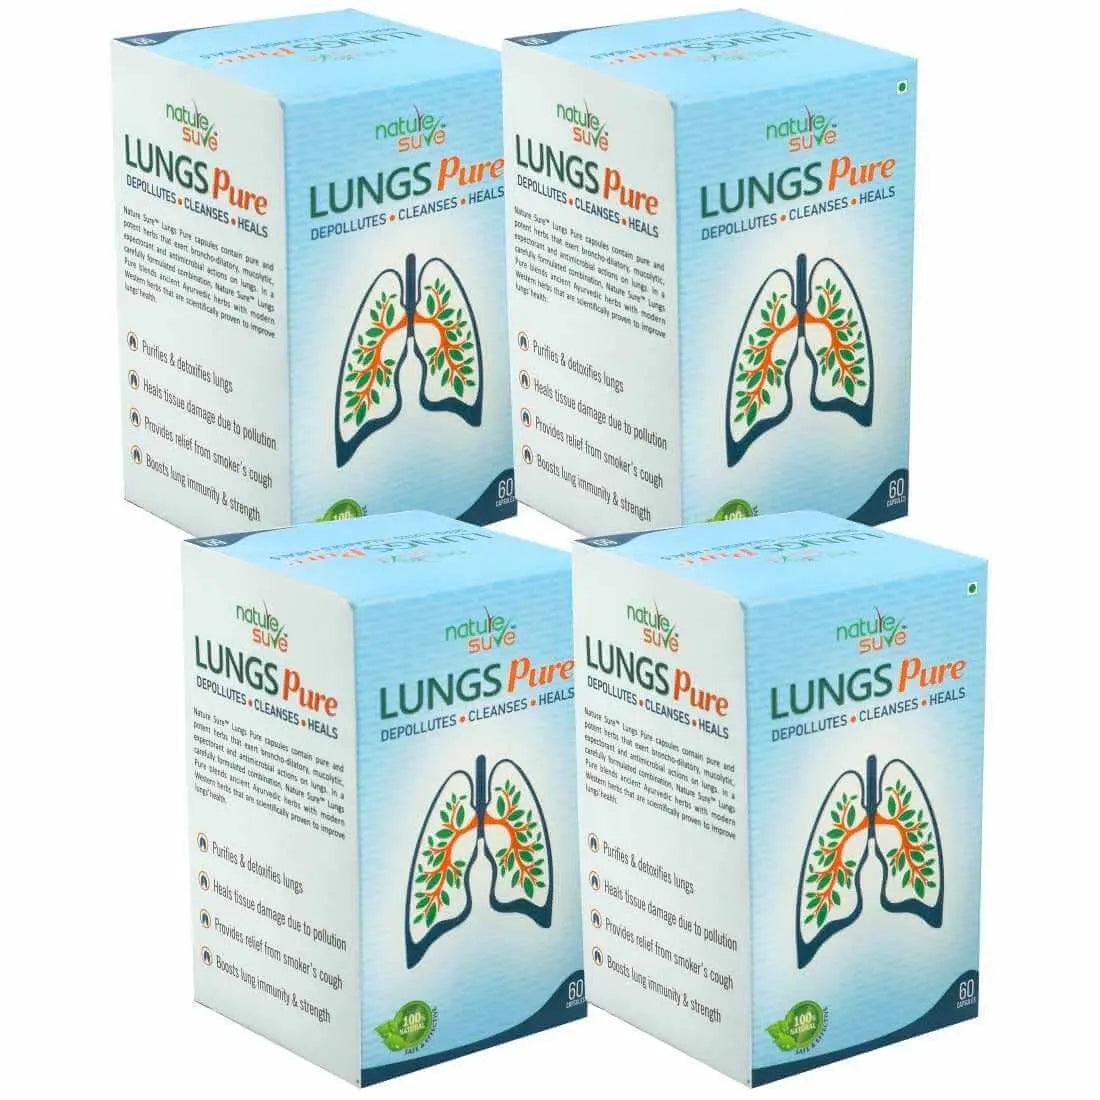 Nature Sure Lungs Pure for Protection Against Pollution, Smoke & Respiratory Health Problems - 60 Capsules 8903540009484